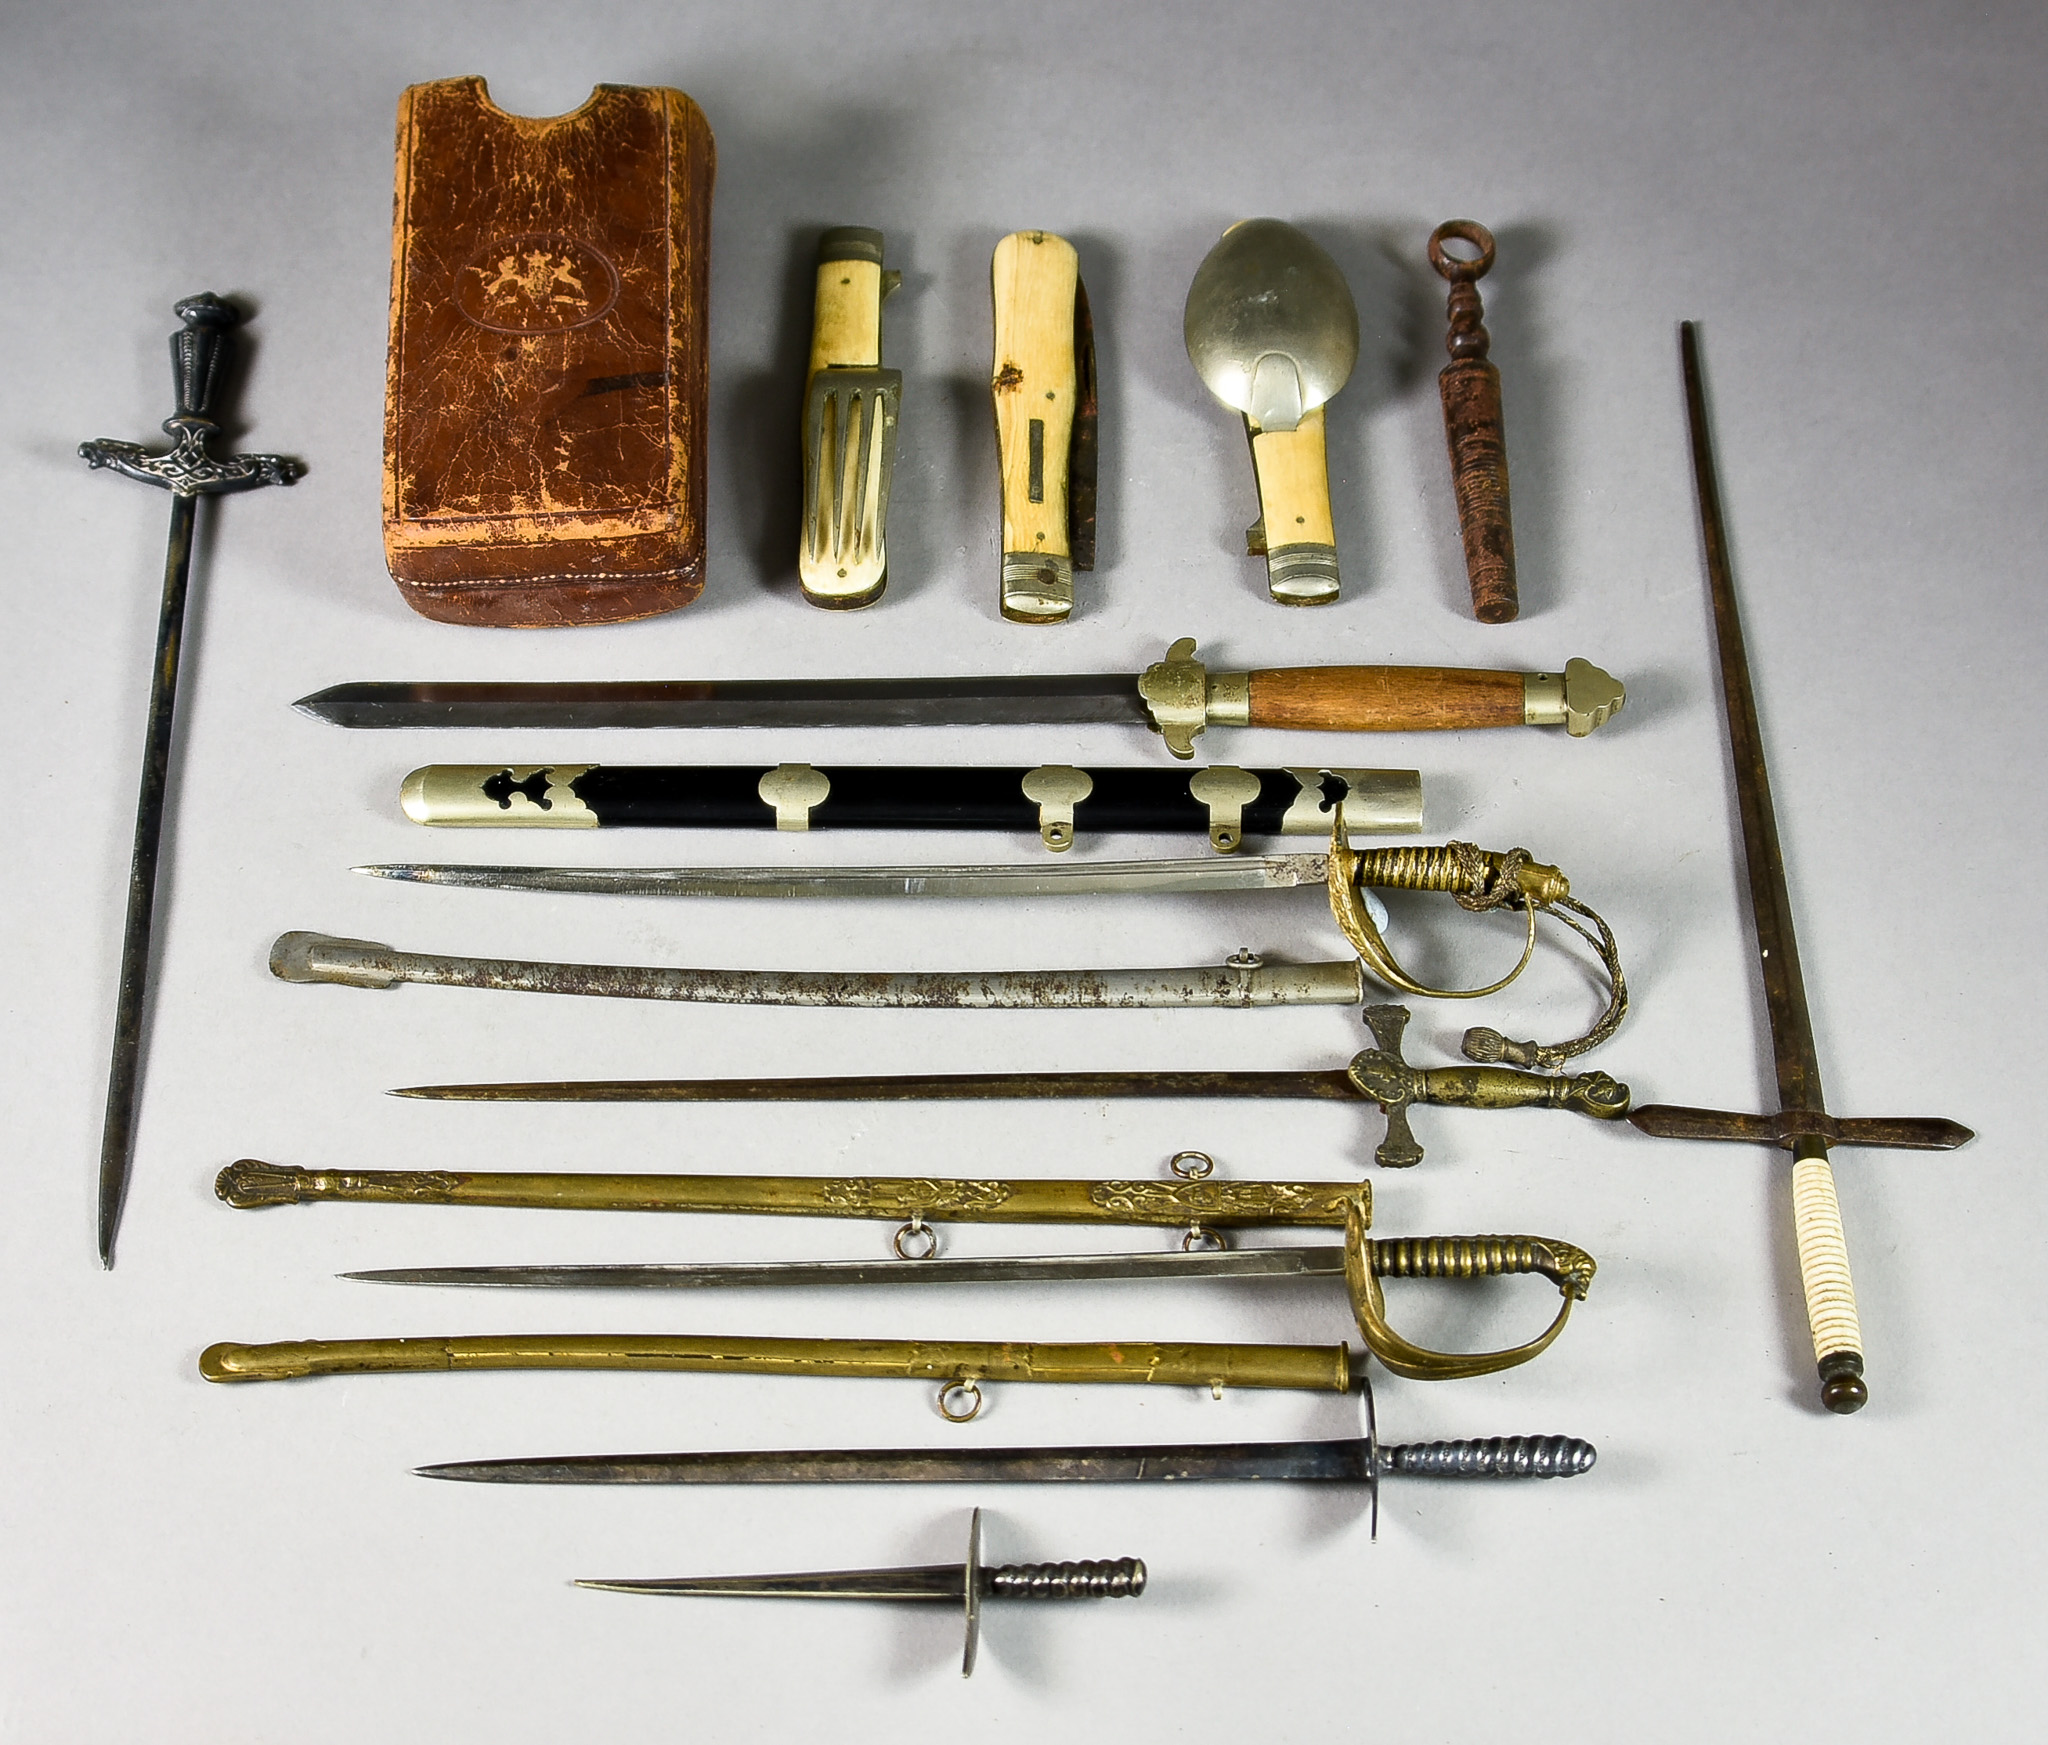 A Late 19th/Early 20th Century Gentleman's Travelling Companion, comprising - knife, fork, spoon and